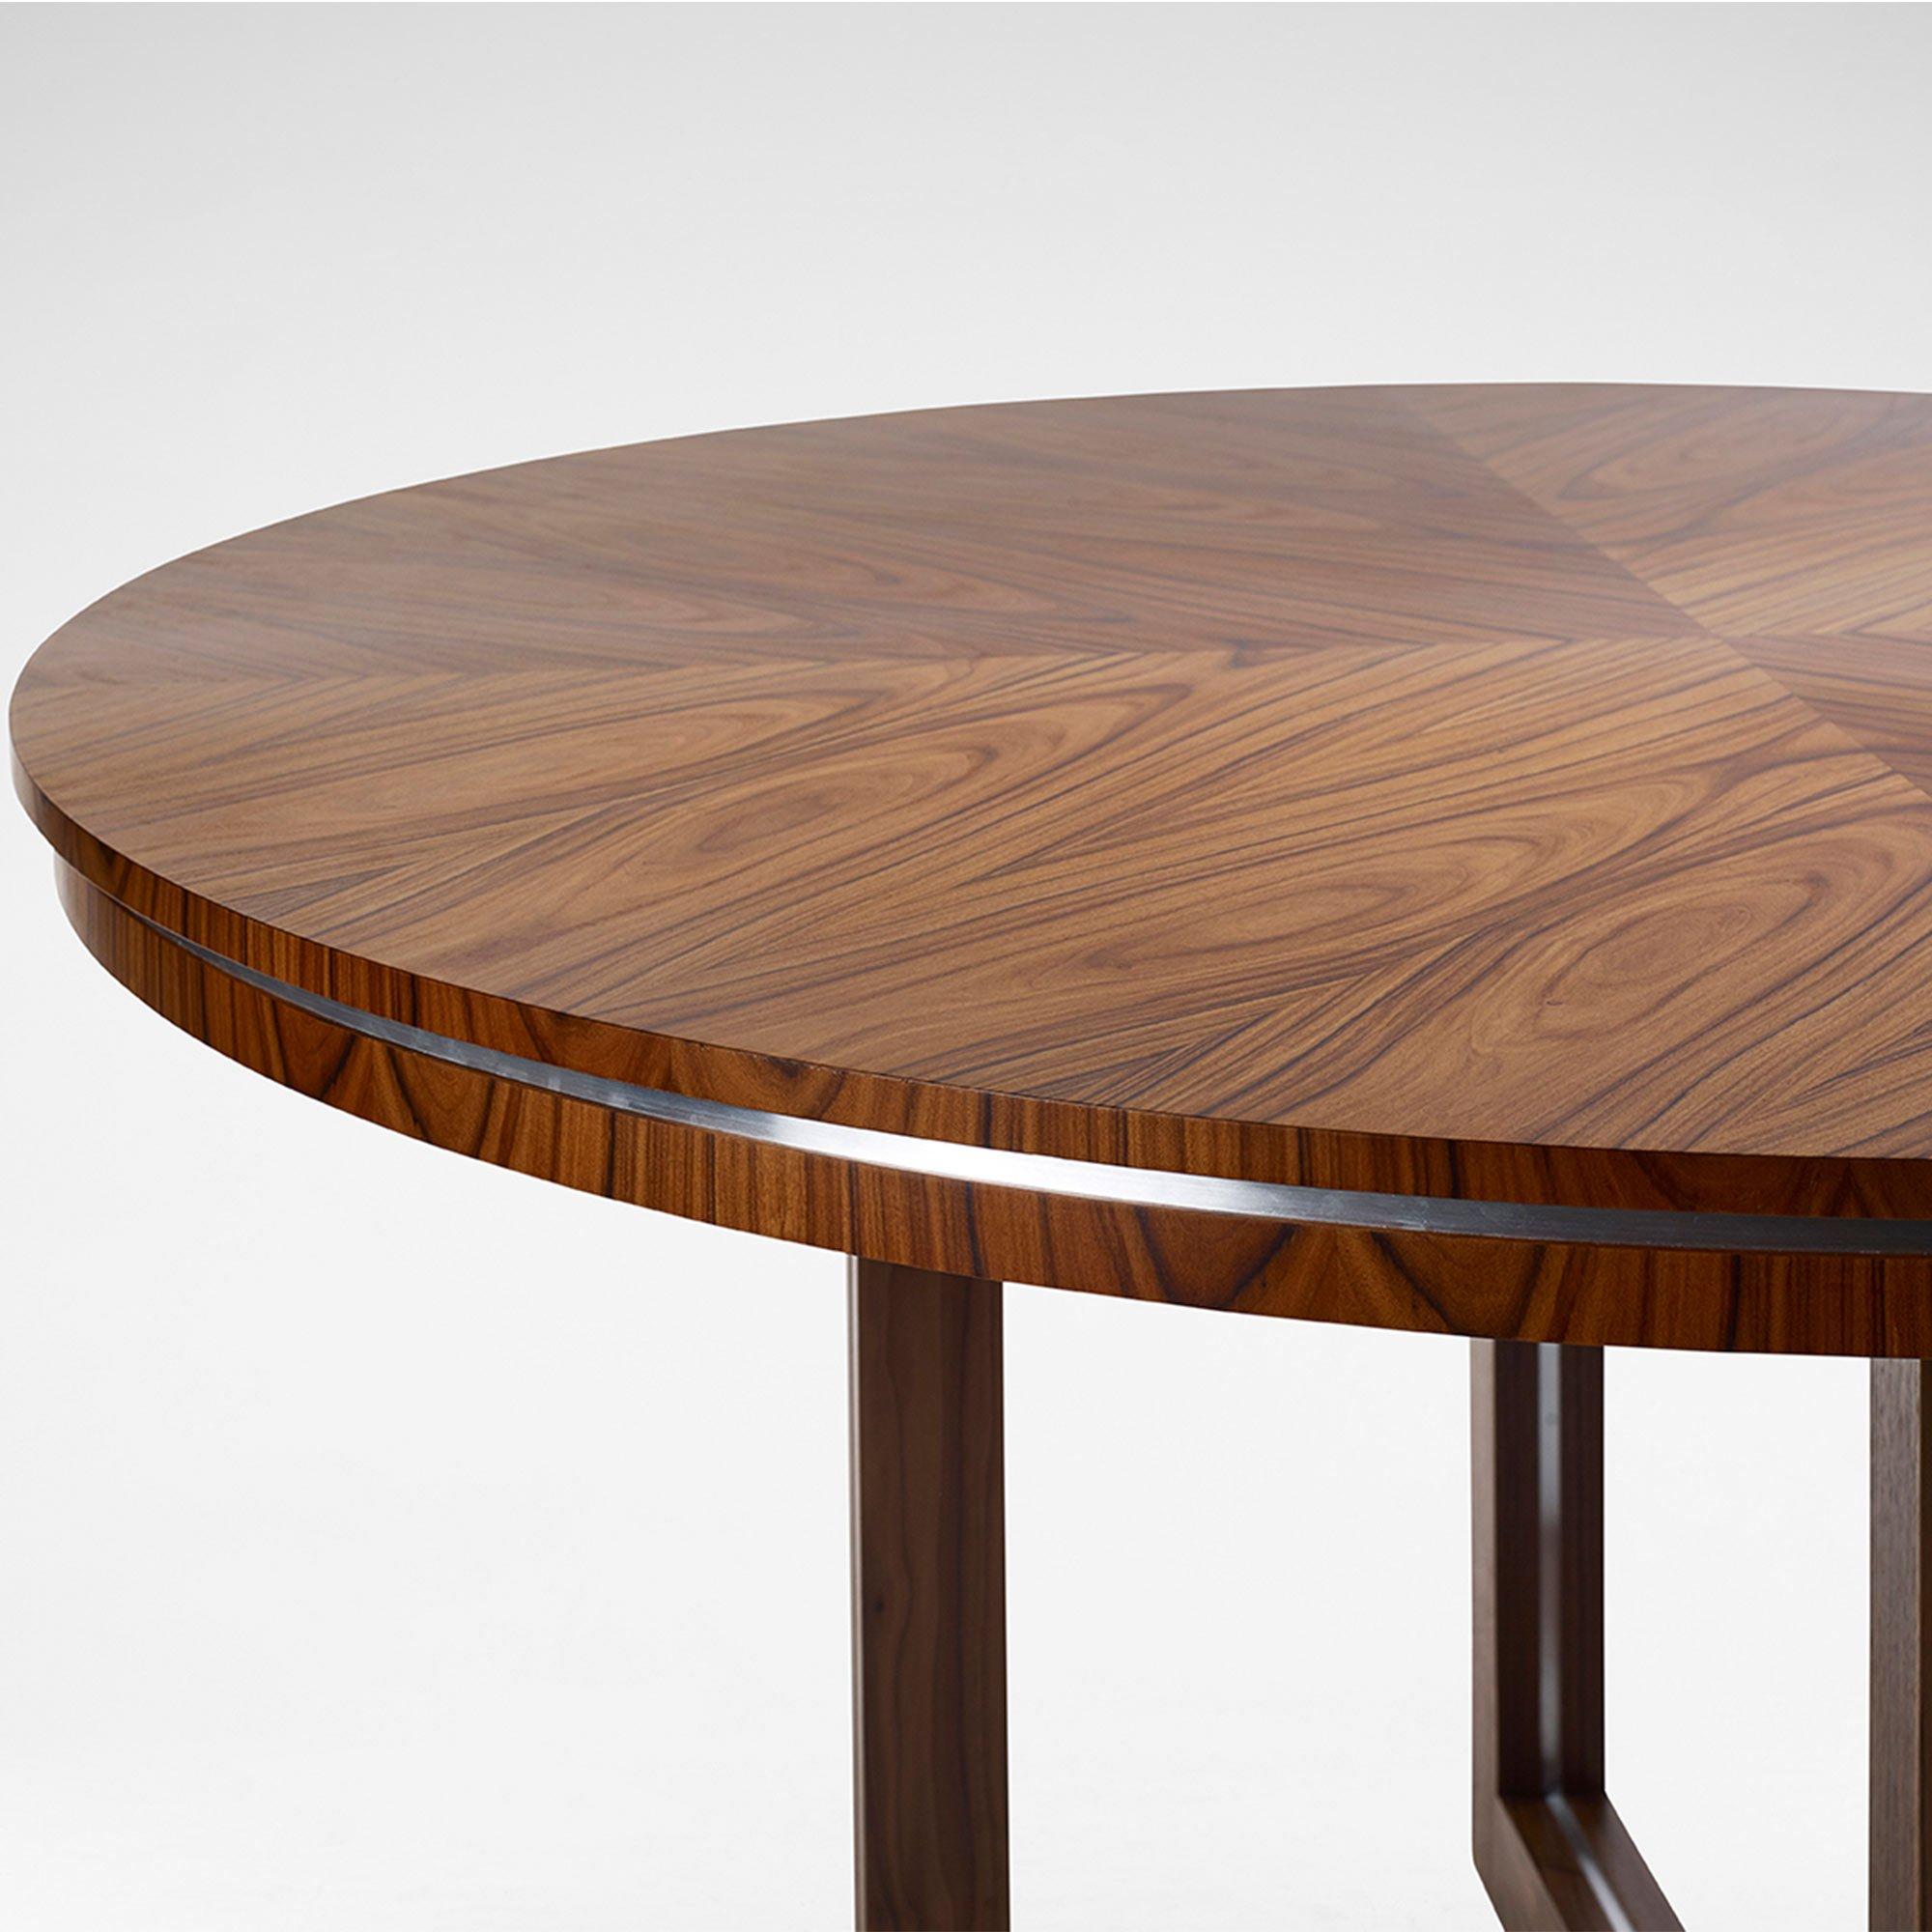 The Helix circular dining table, crafted in Santos rosewood is a sophisticated addition to your household. The Linley Helix collection makes an elegant and unique addition to your dining suite. Our Helix collection draws inspiration from the 20th